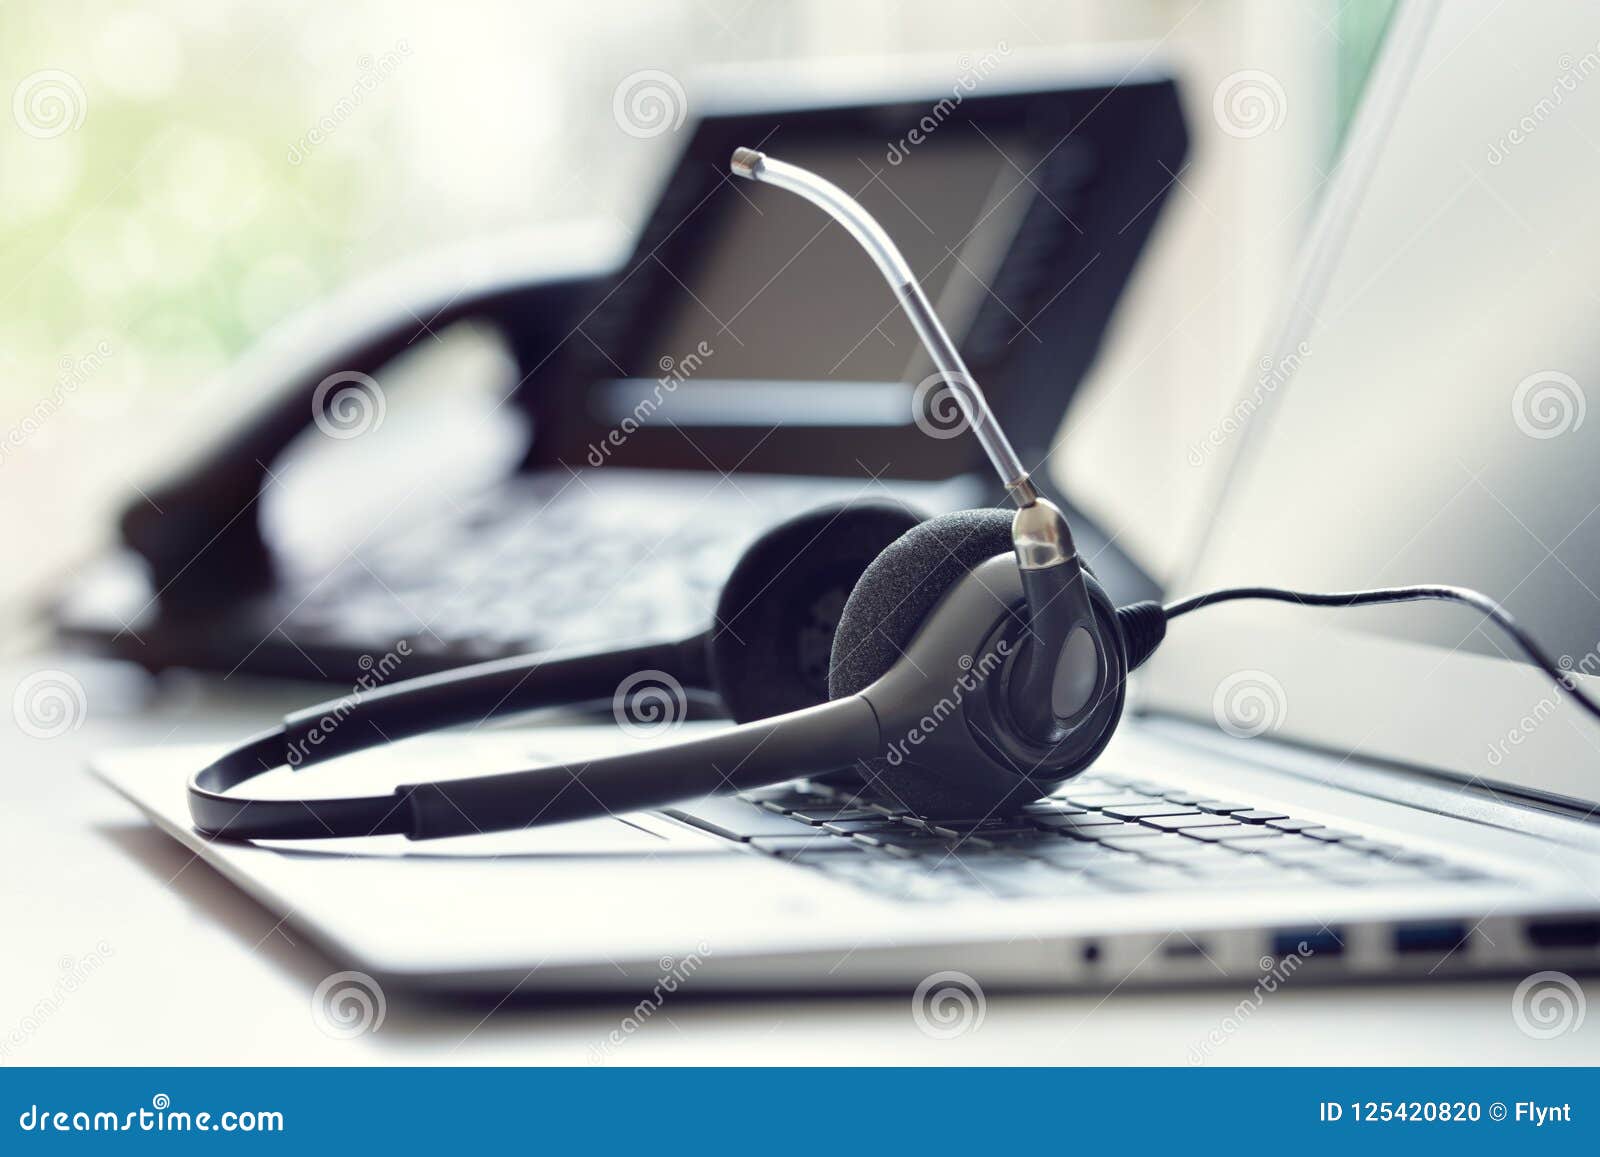 headset headphones telephone and laptop in call center